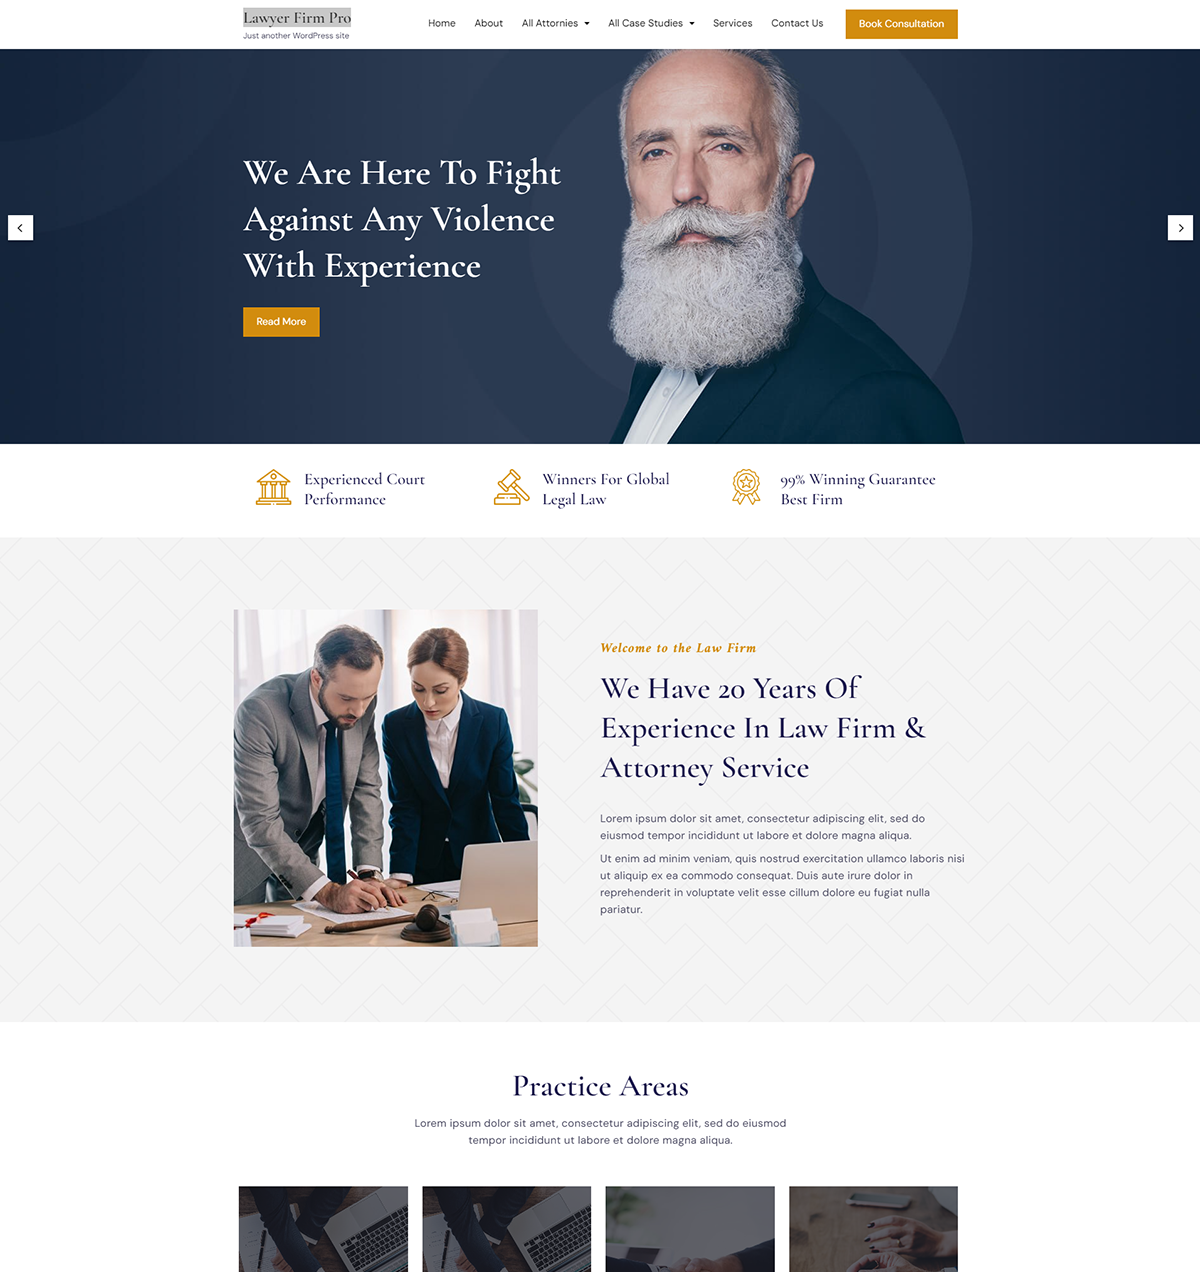 Lawyer Firm Pro Theme